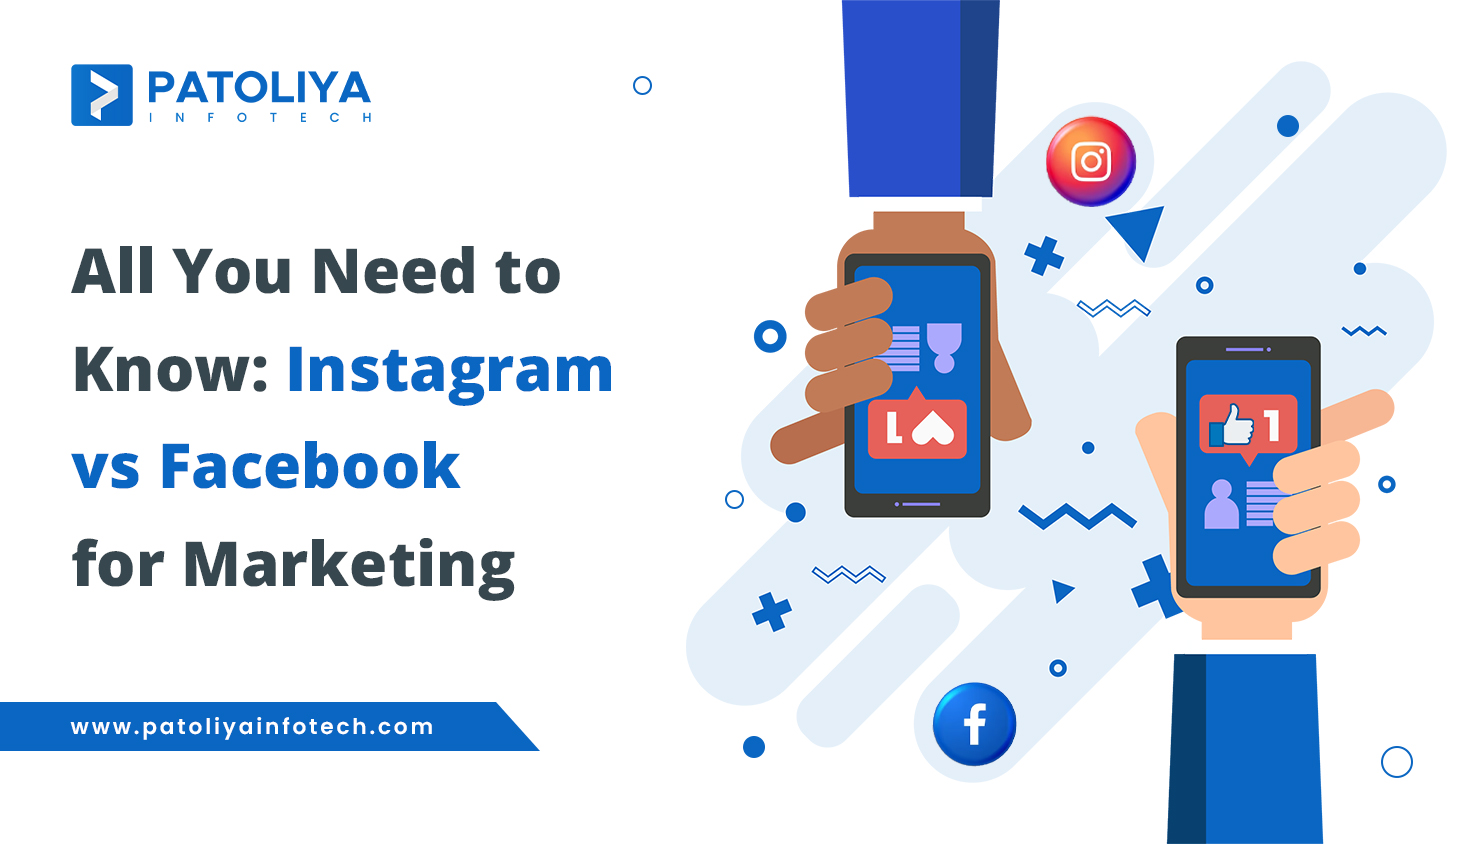 All You Need to Know: Instagram vs. Facebook for Marketing